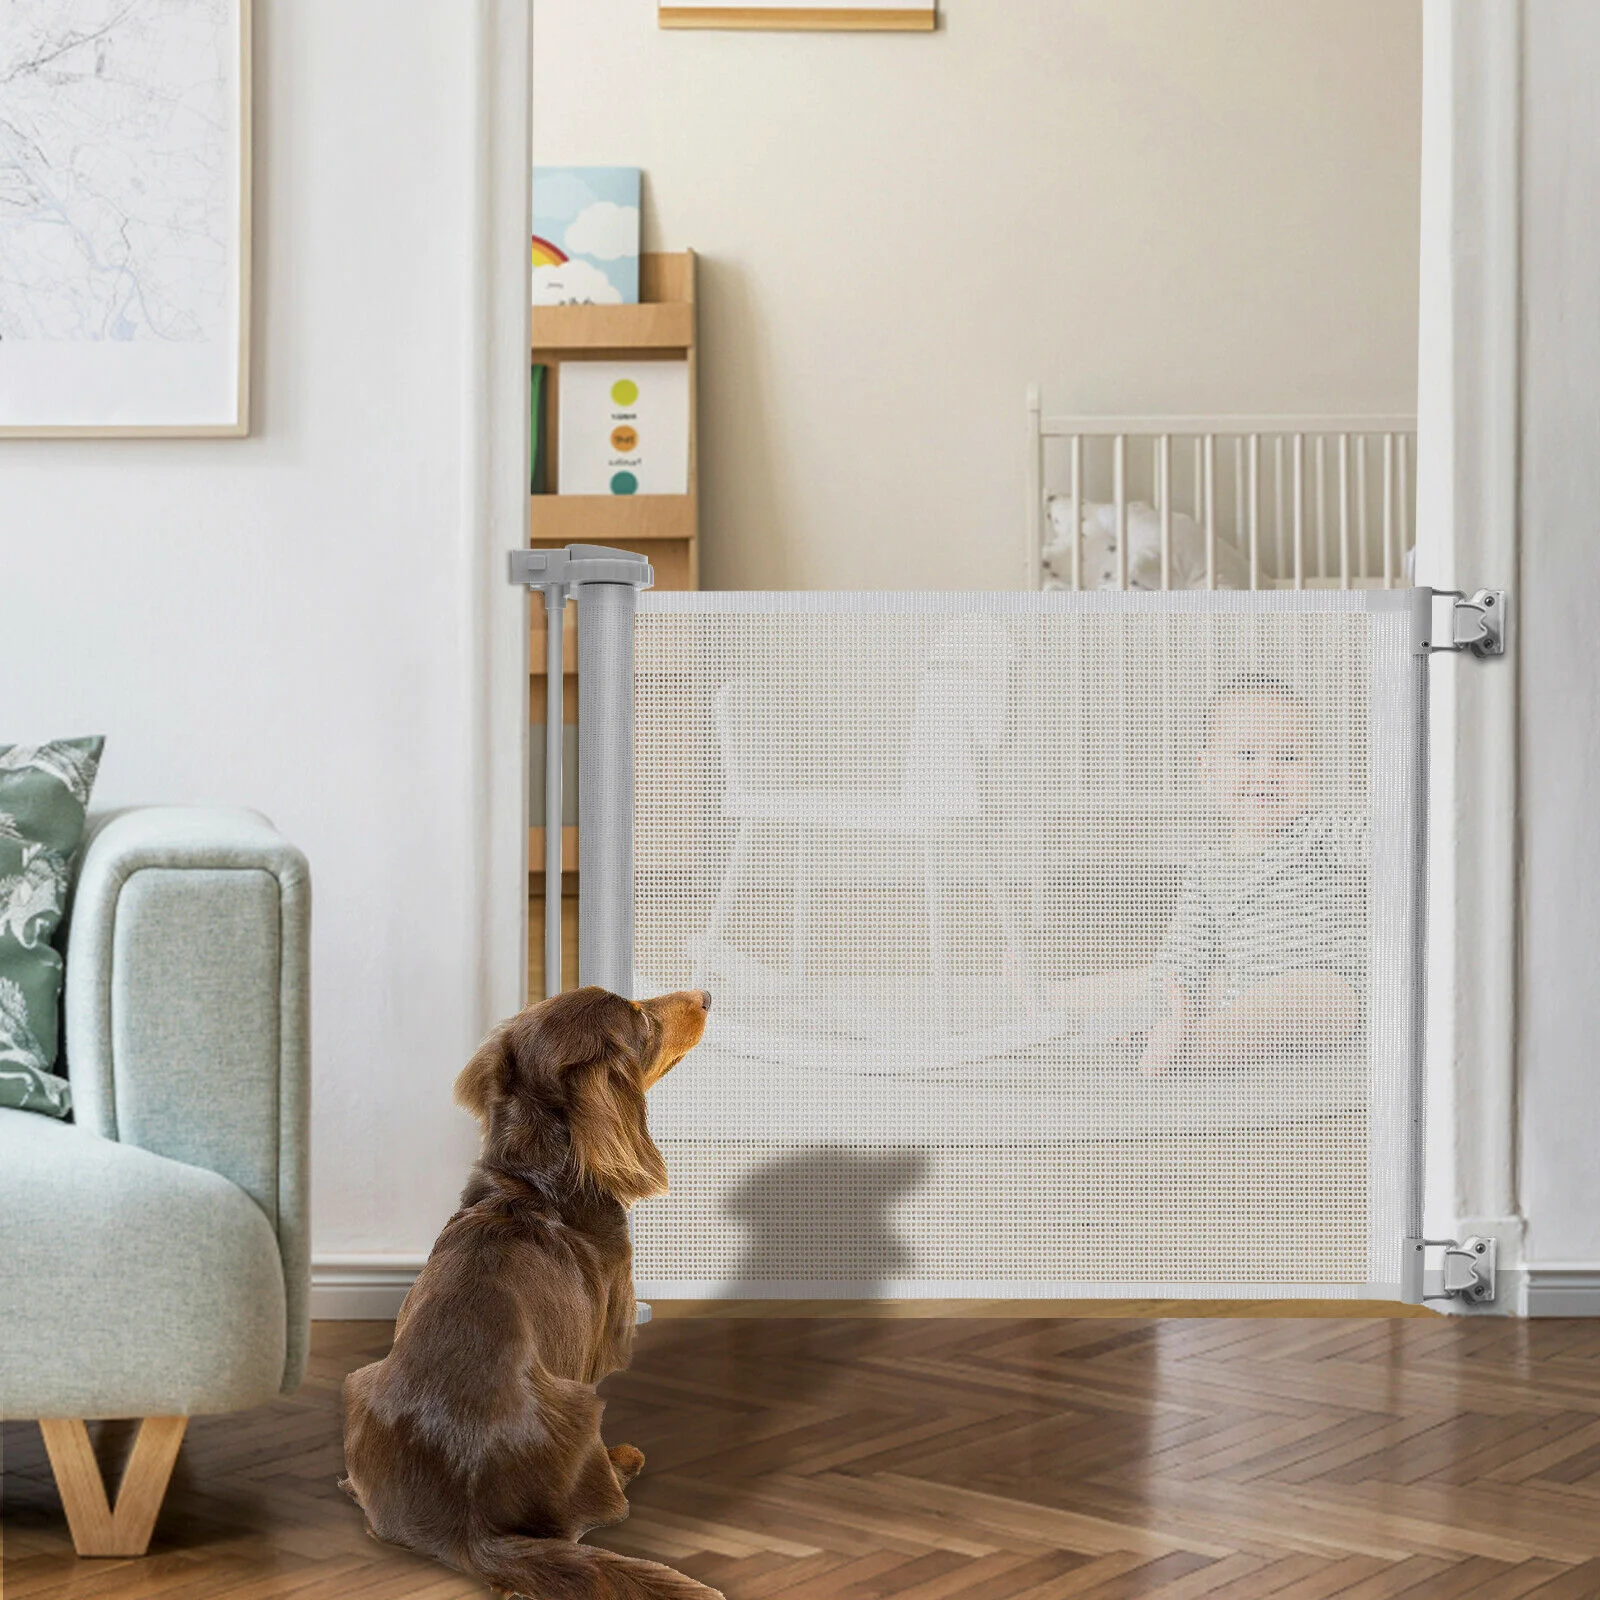 Large Dog Door Barrier Baby Safety Gate Mesh Fence for Kids Safe Portable Dog Accessories Indoor Home Stairs Guard Pet Crate